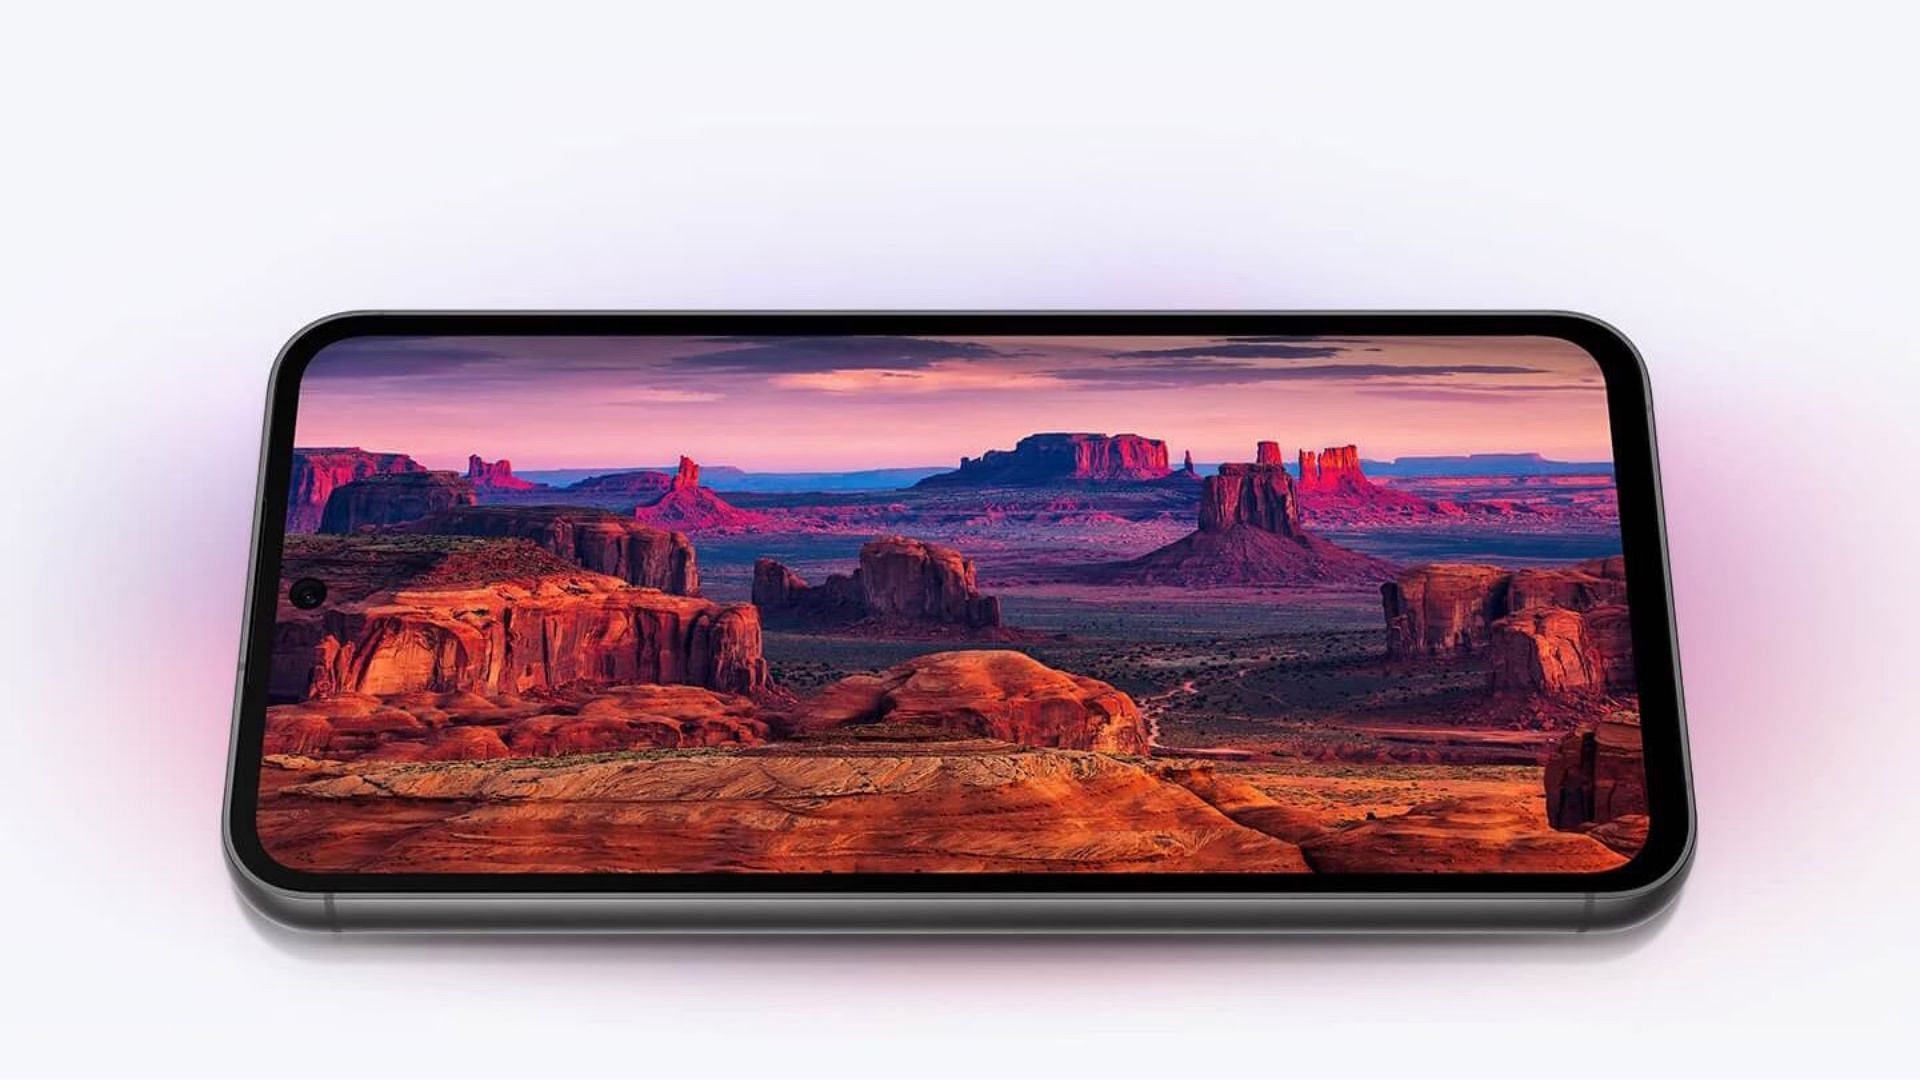 Samsung offers a larger screen size with better protection. (Image via Samsung)